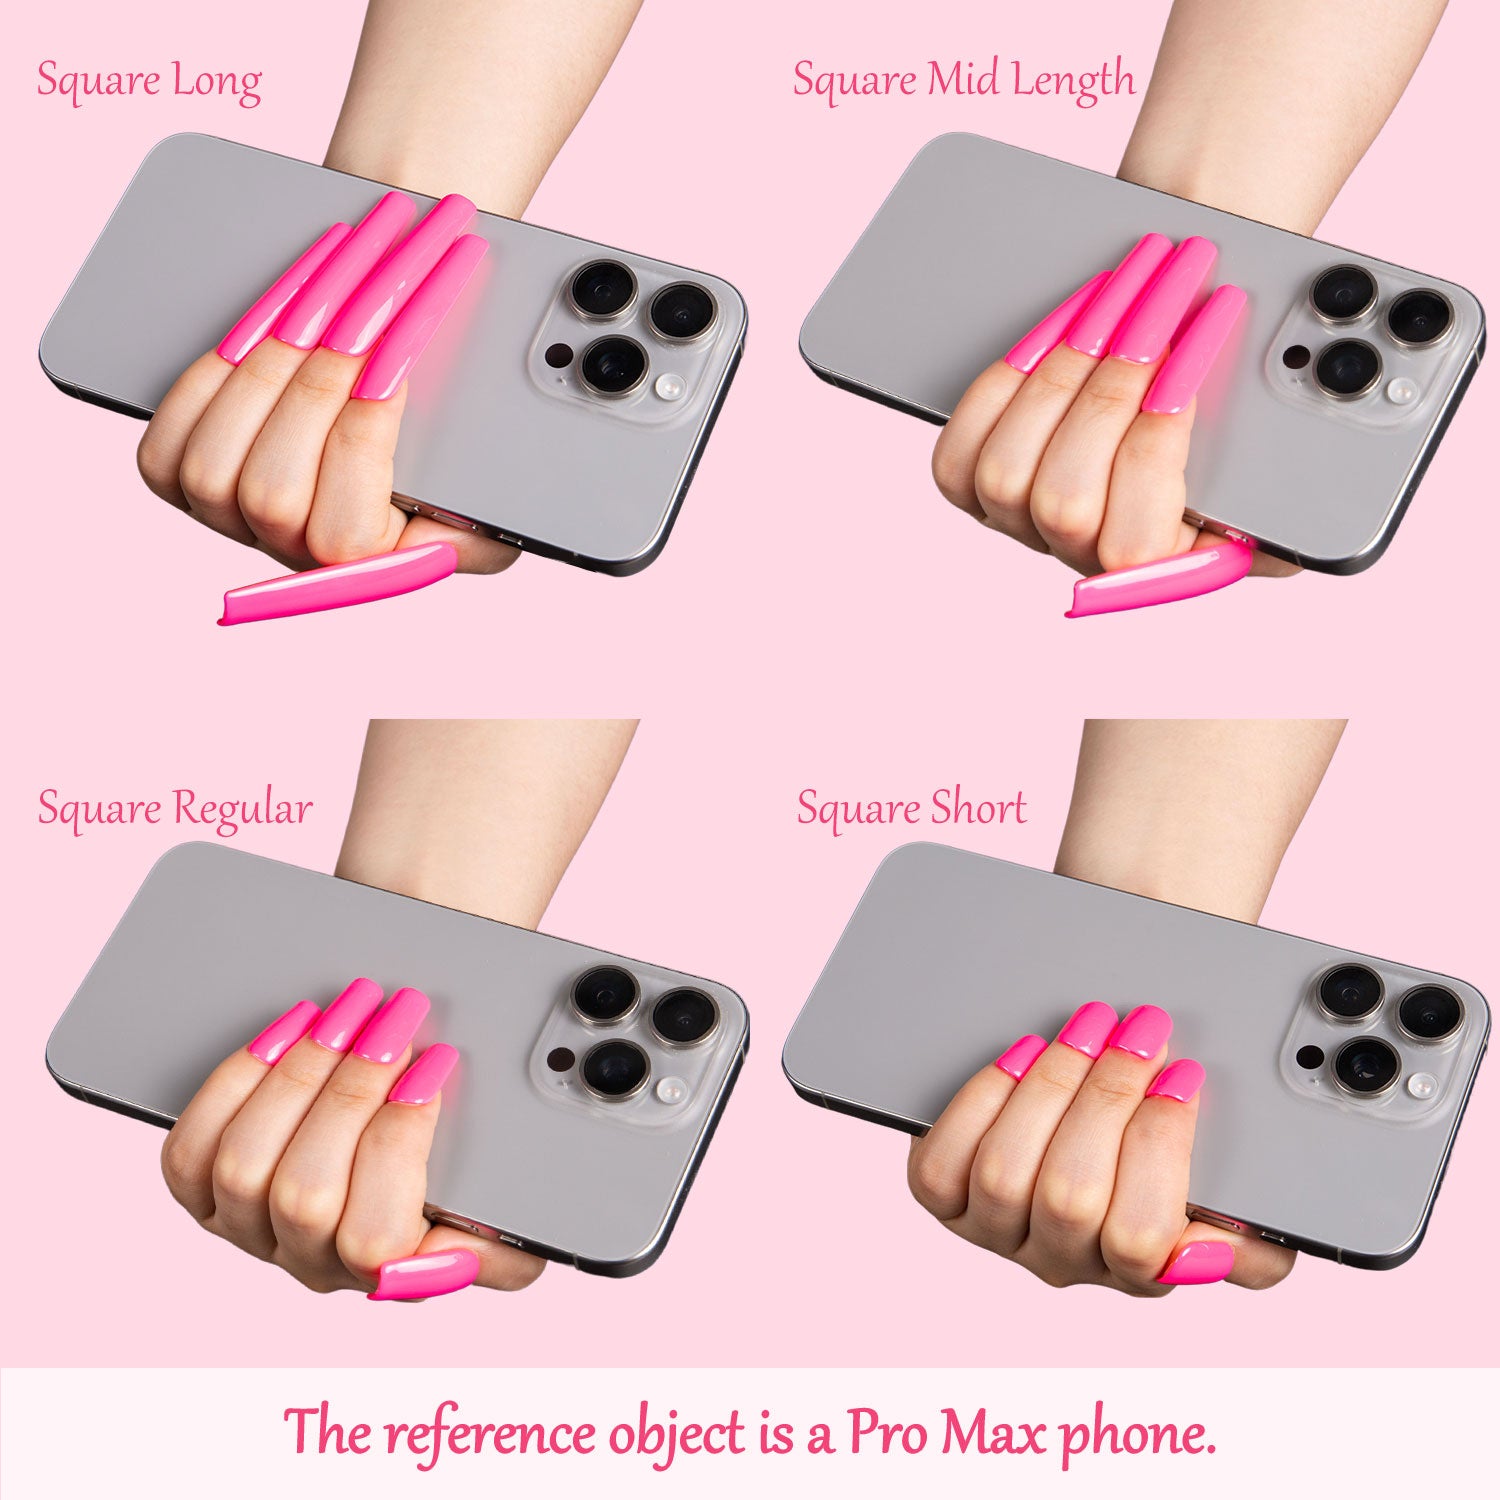 Comparison of square-shaped pink press-on nails in Long, Mid Length, Regular, and Short sizes, each shown holding a Pro Max phone